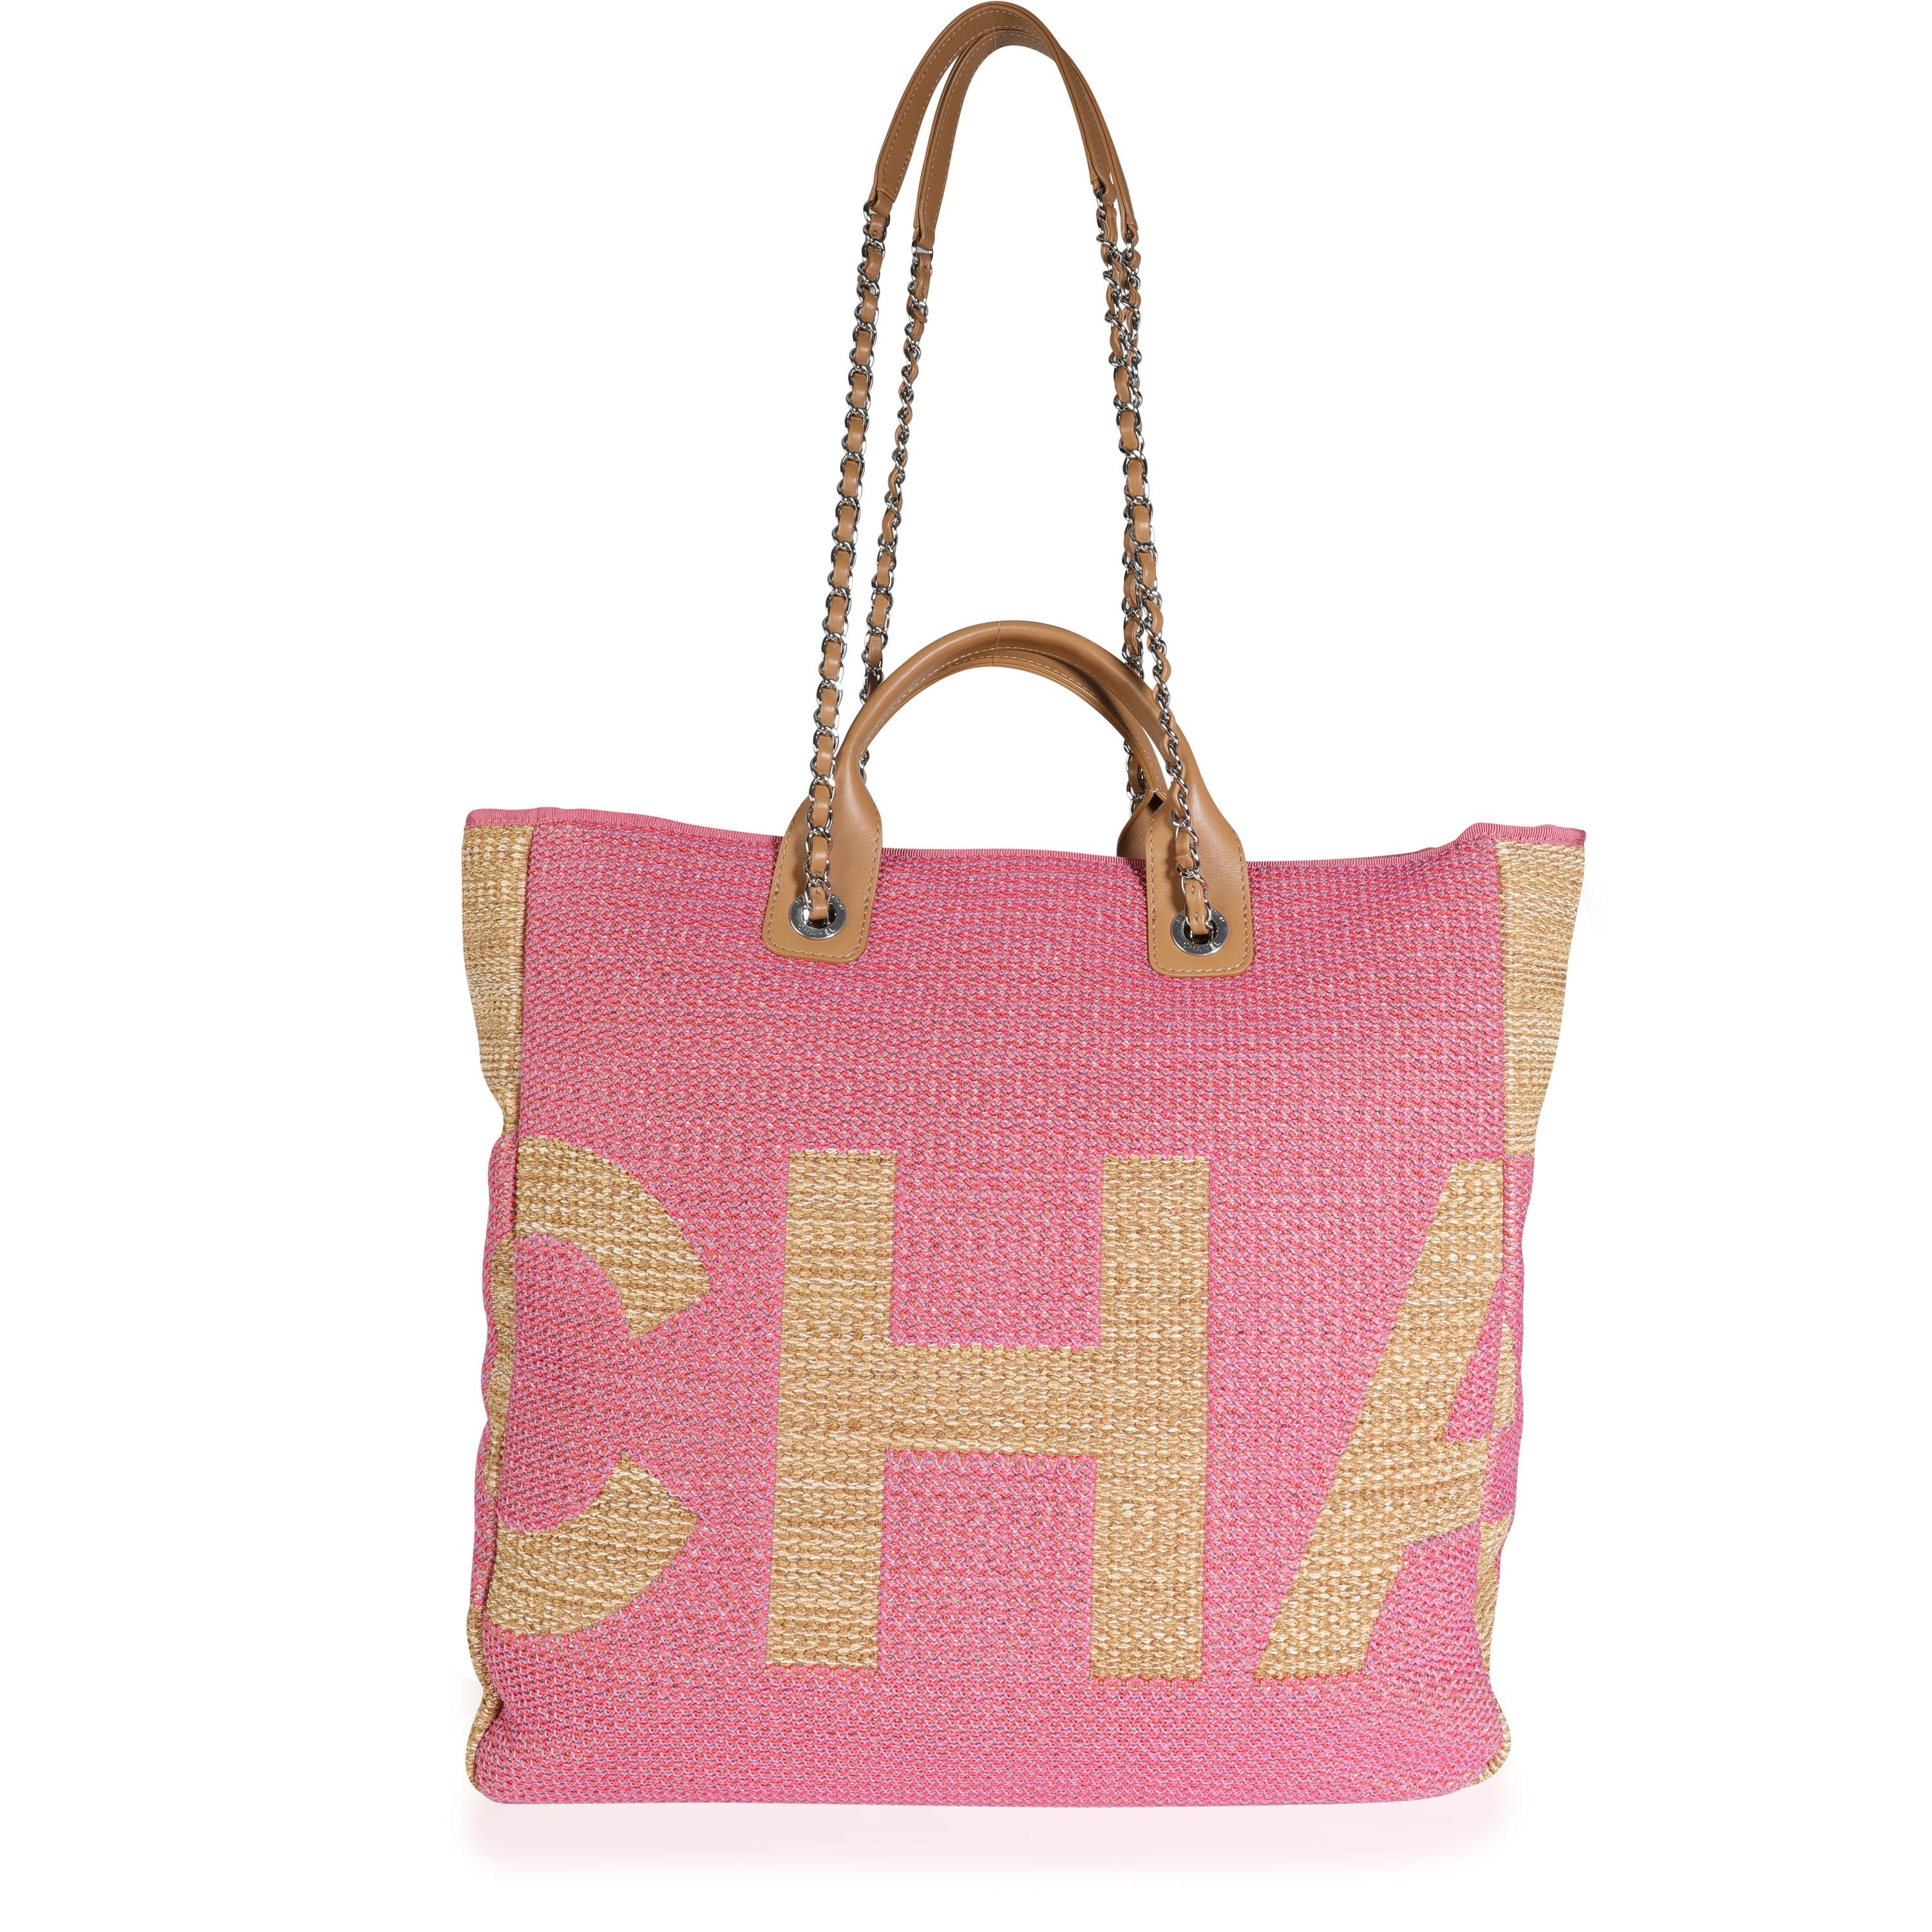 Listing Title: Chanel Pink & Tan Raffia Large Shopping Tote
SKU: 114256
MSRP: 4300.00
Condition: Pre-owned (3000)
Condition Description: This Large Shopping Tote by Chanel is constructed with a fun and summery Pink & Tan Raffia, with tan leather